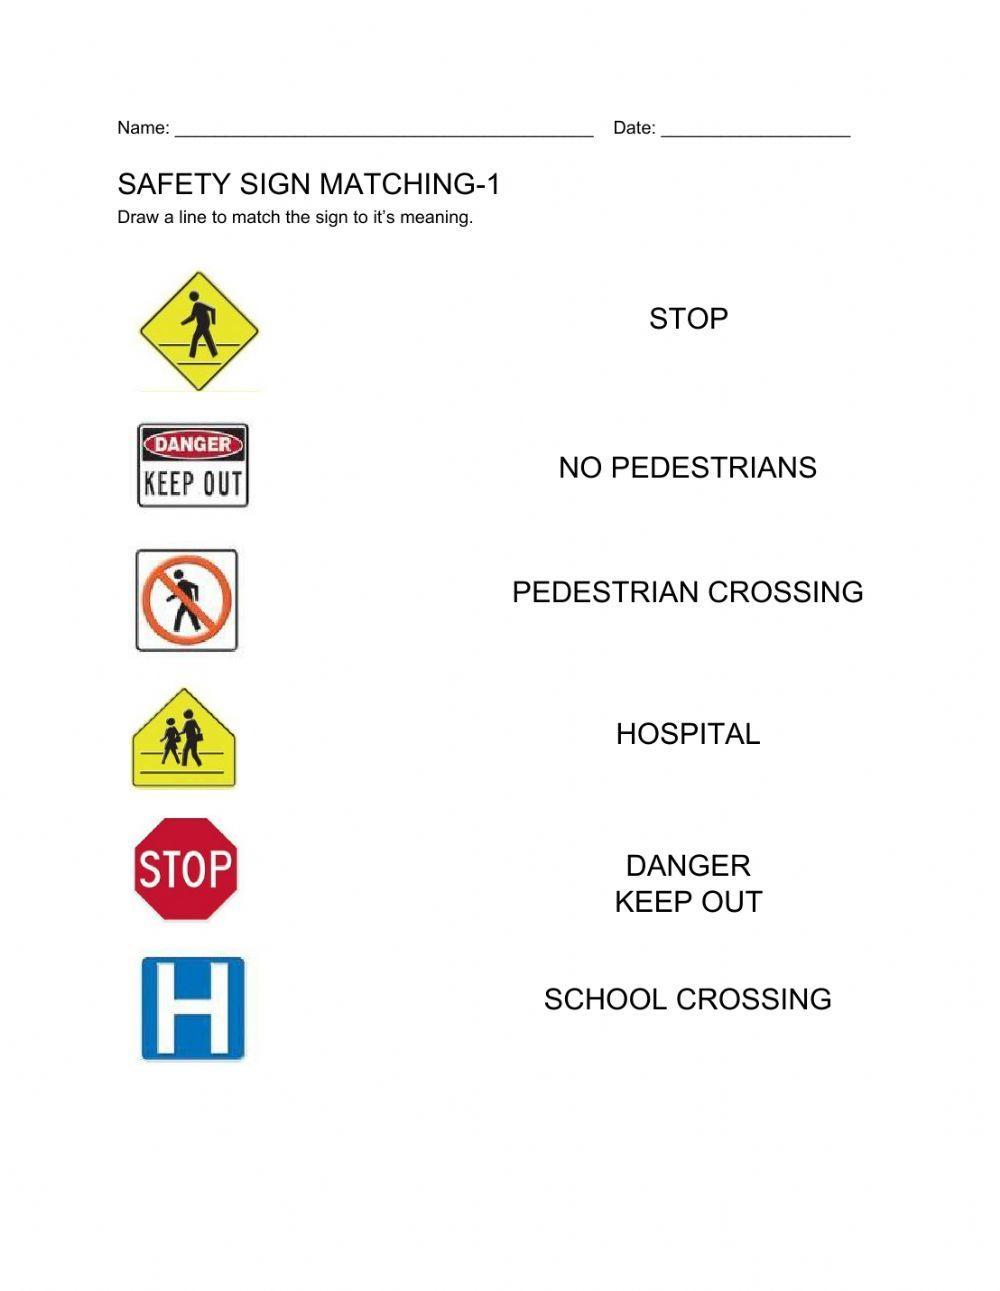 Safety signs-1